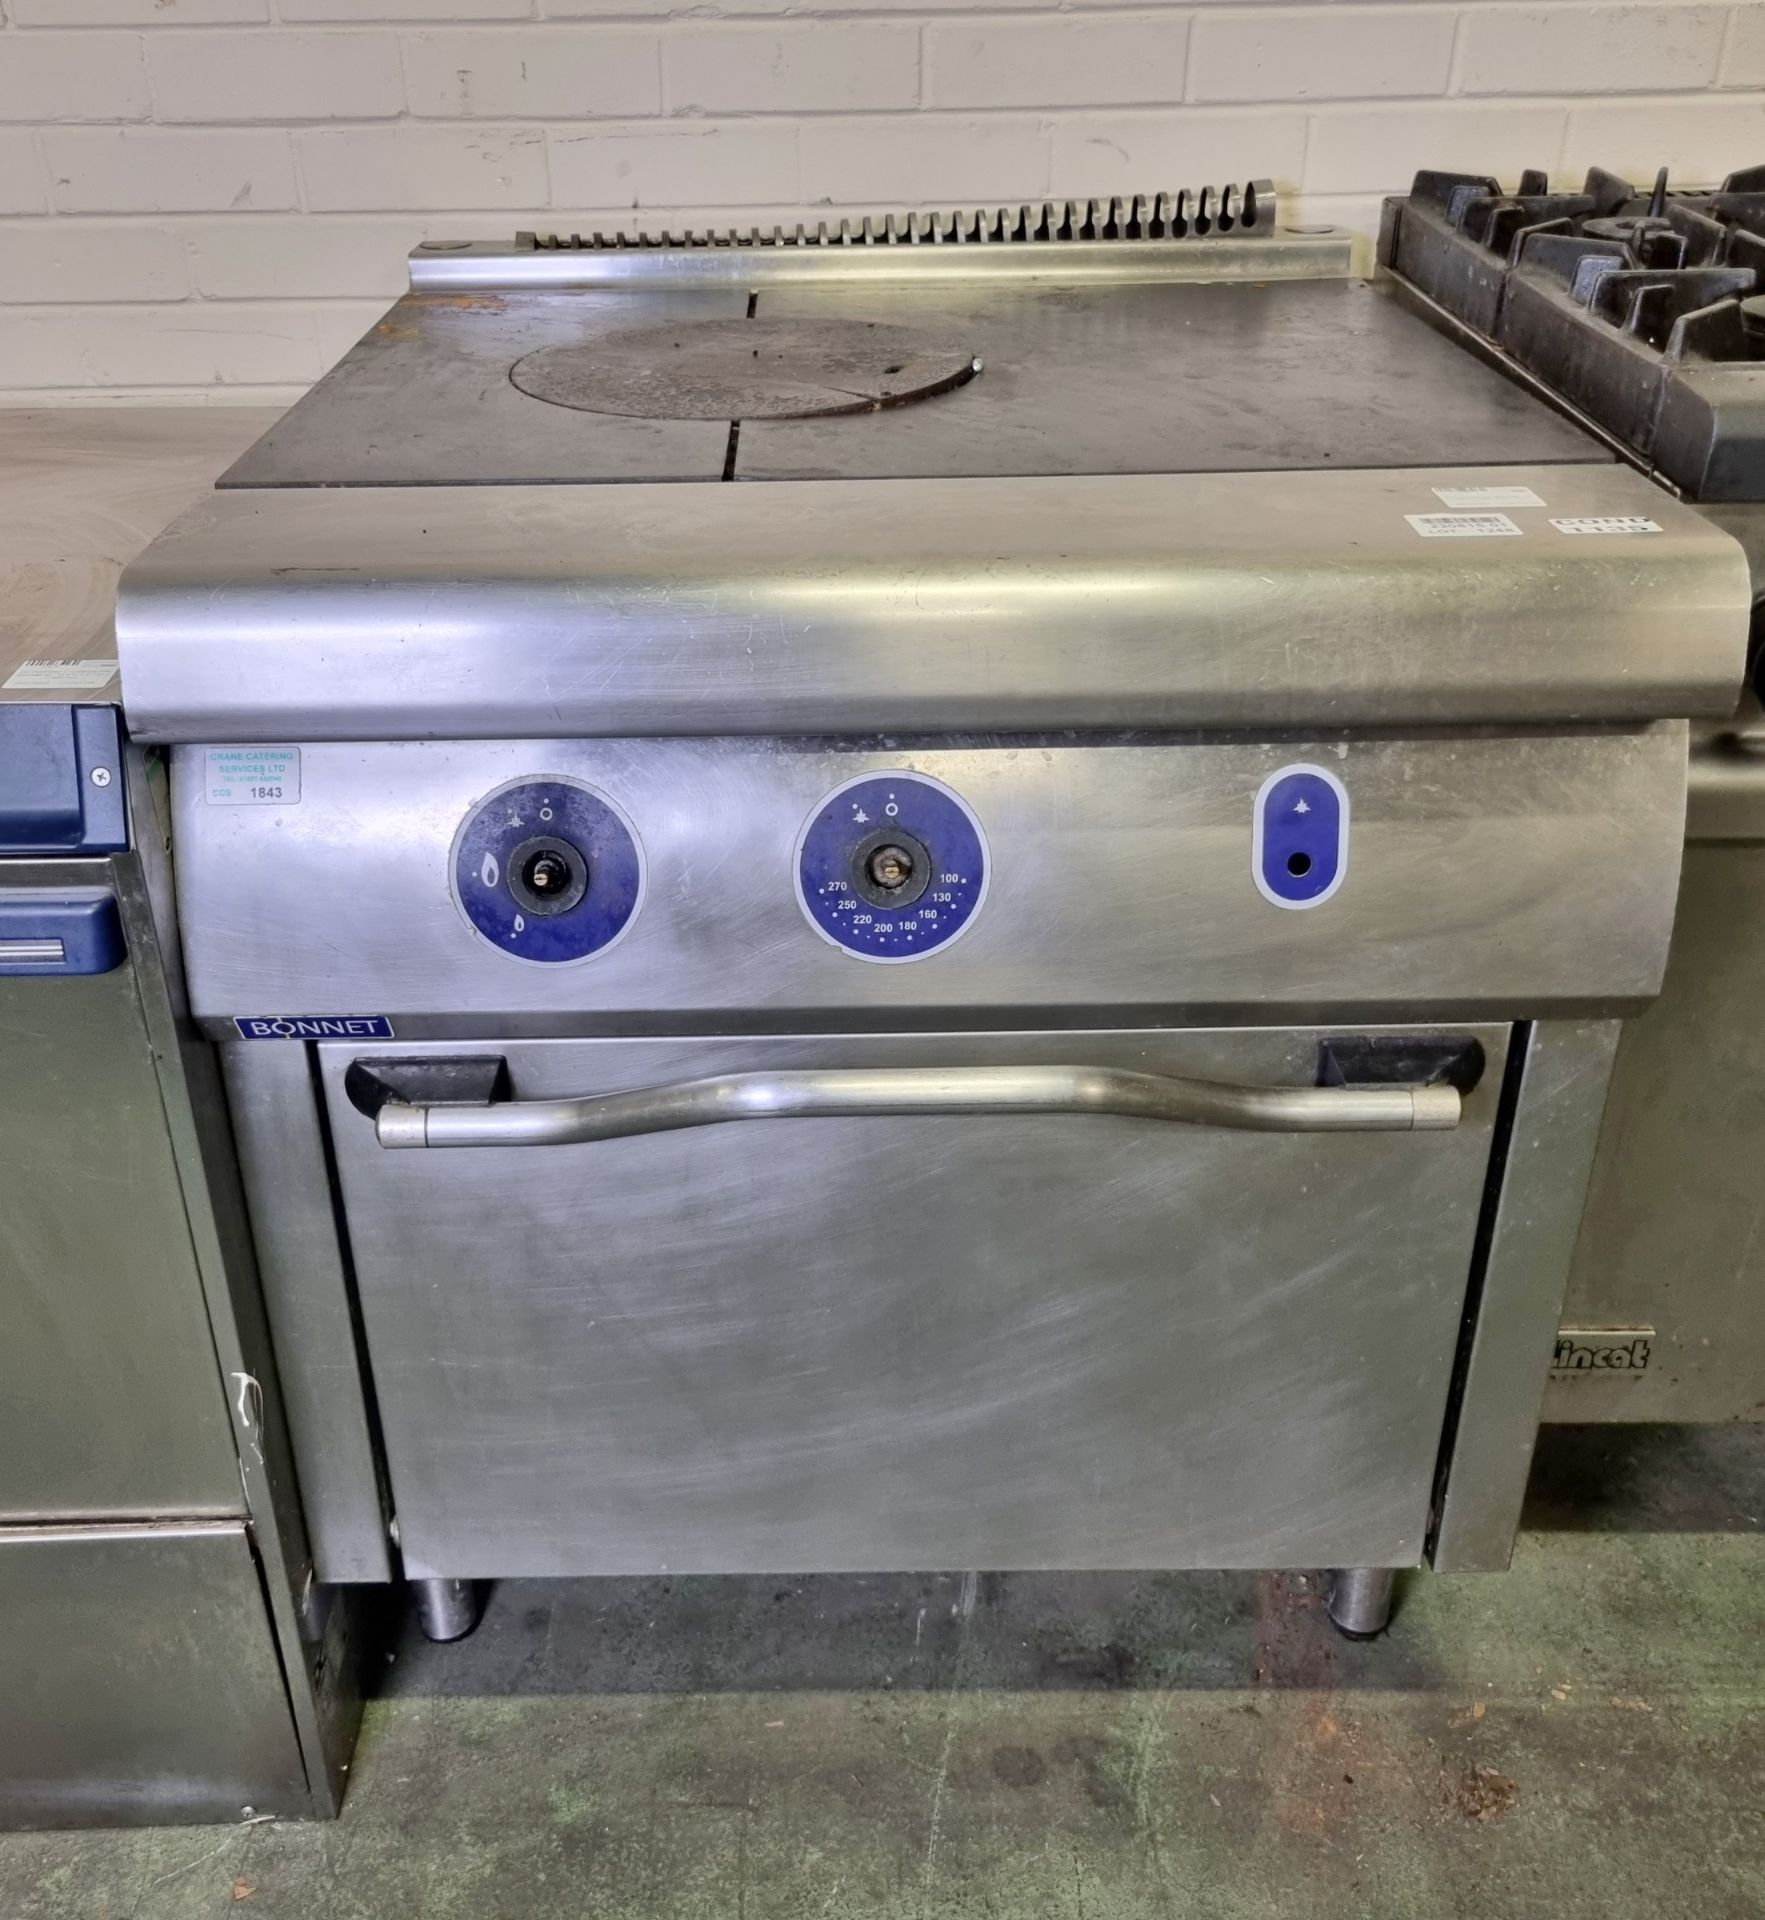 Bonnet solid top gas oven - W 820 x D 950 x 980 mm - MISSING KNOBS